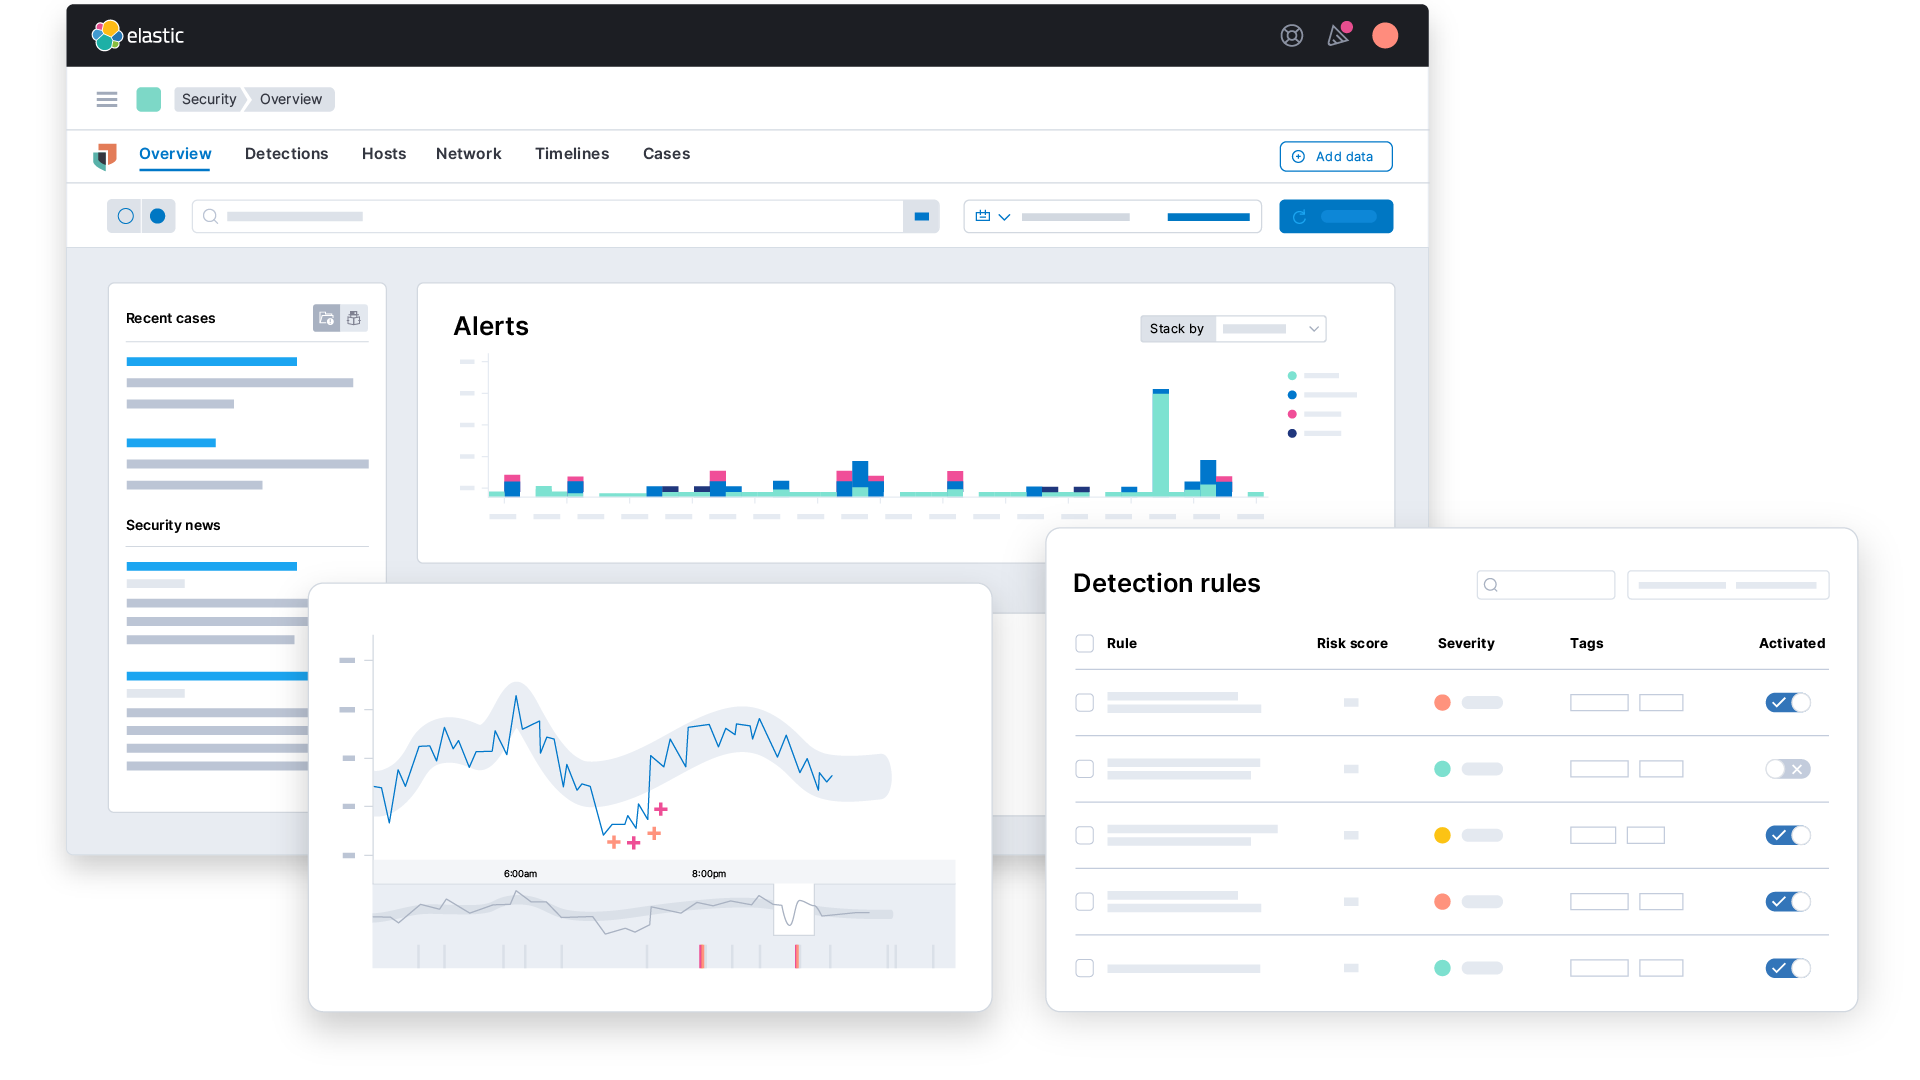 Elastic Security for SIEM, with SOC dashboard, AI and ML analytics, and detection rules